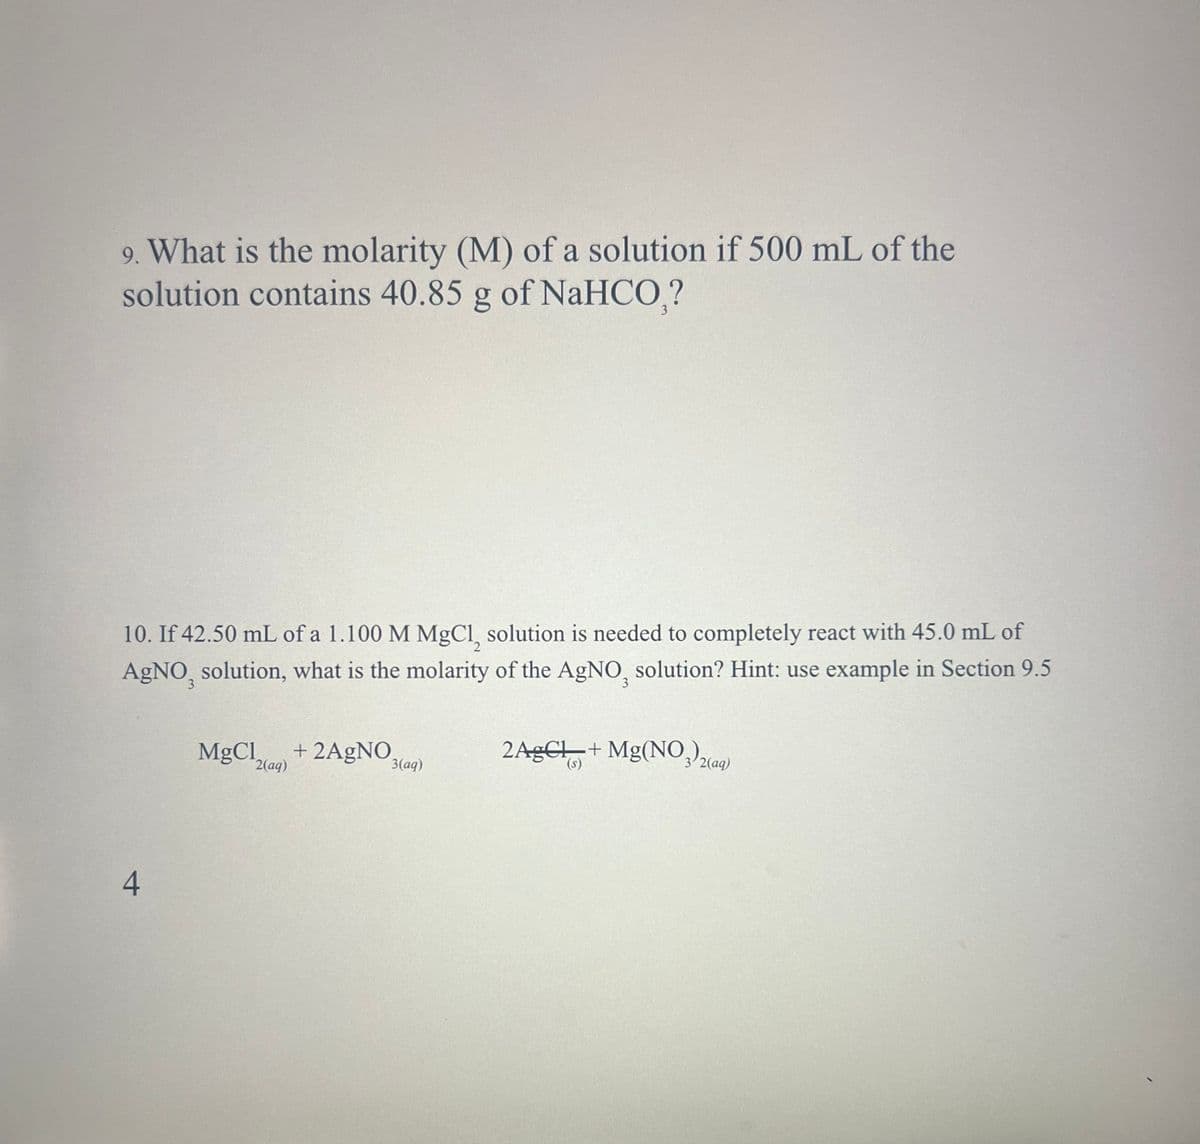 9. What is the molarity (M) of a solution if 500 mL of the
solution contains 40.85 g of NaHCO₁?
10. If 42.50 mL of a 1.100 M MgCl solution is needed to completely react with 45.0 mL of
AgNO, solution, what is the molarity of the AgNO, solution? Hint: use example in Section 9.5
MgCl +2AgNO
2(aq)
3(aq)
2AgCl + Mg(NO3)2(aq)
(s)
4